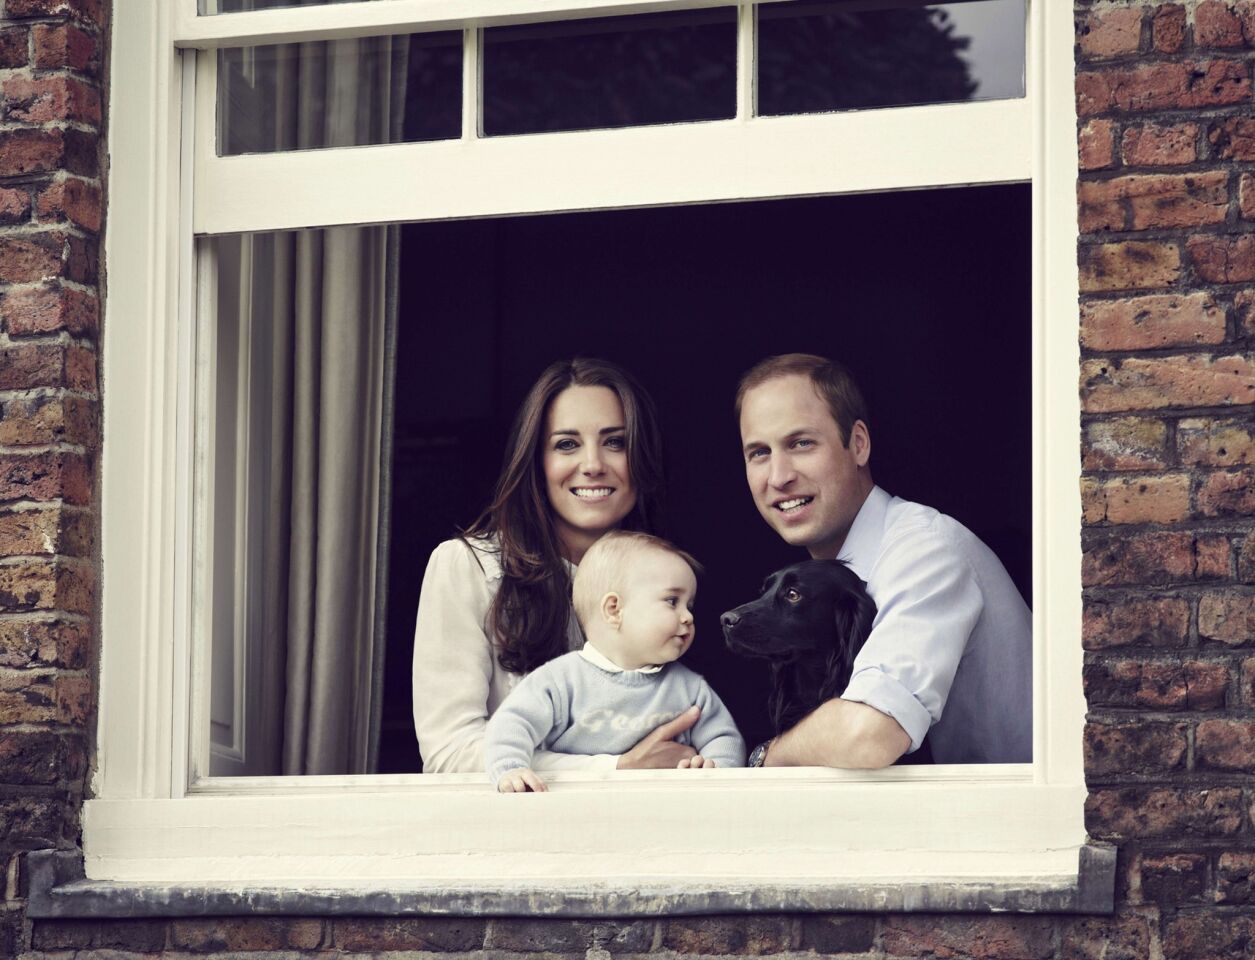 Prince William, Duke of Cambridge, Catherine, Duchess of Cambridge and Prince George of Cambridge pose for an official family portrait at London's Kensington Palace, ahead of their tour to Australia and New Zealand, on March 18, 2014.